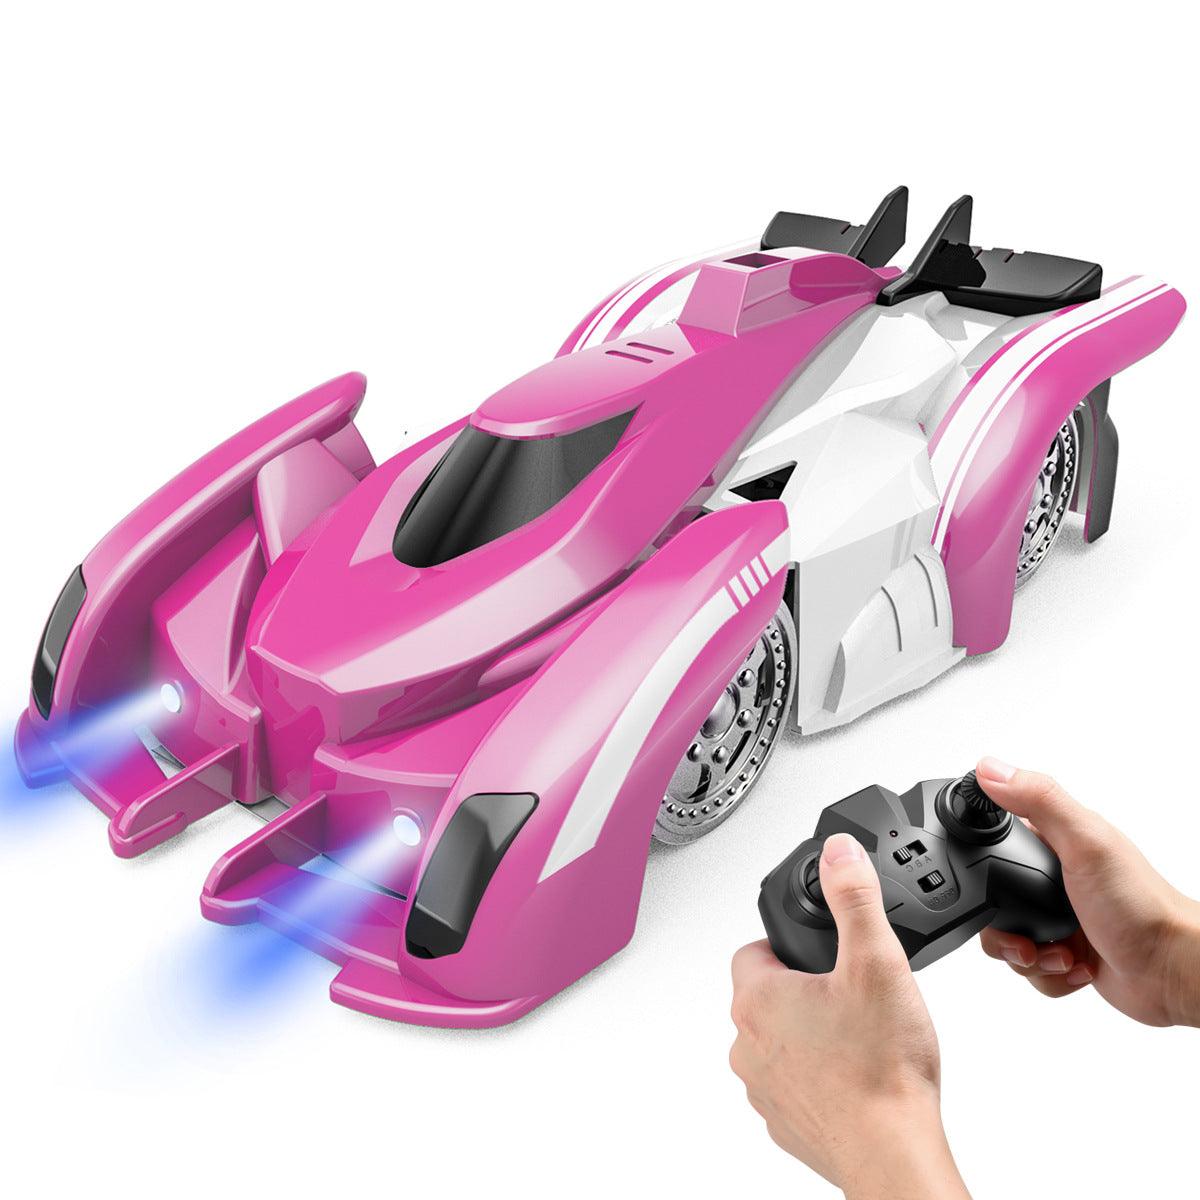 Wall Climbing RC Remote Control Wireless Car Intelligent Treat Toys - Pink - 0 - CozyBuys